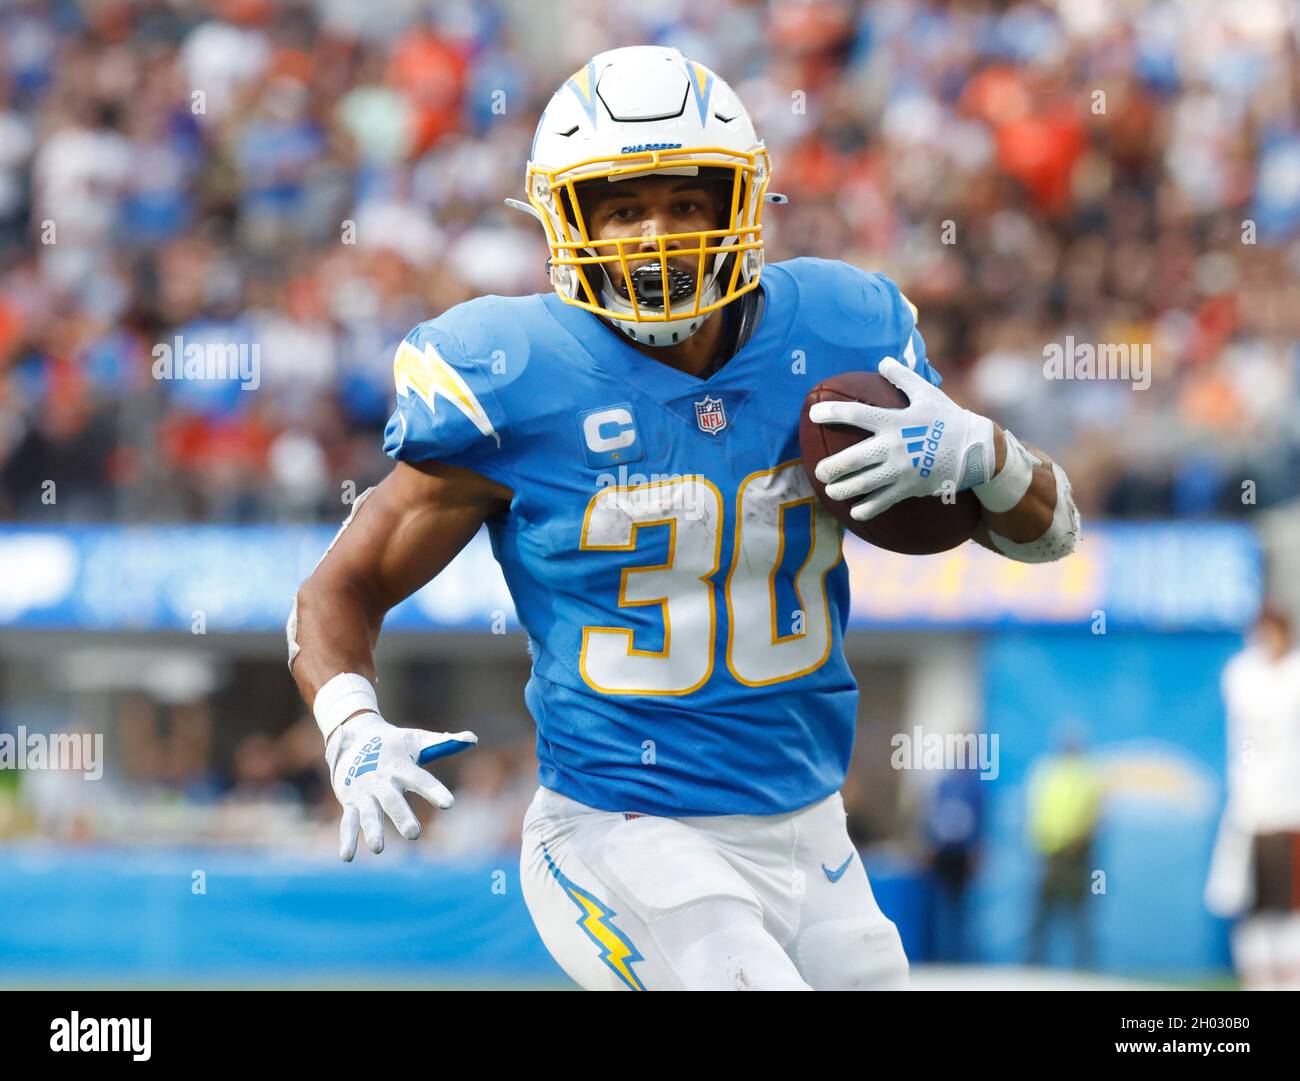 Austin Ekeler exclusive Fantasy Football Justin Herberts development and  year five with the Los Angeles Chargers  NFL News  Sky Sports